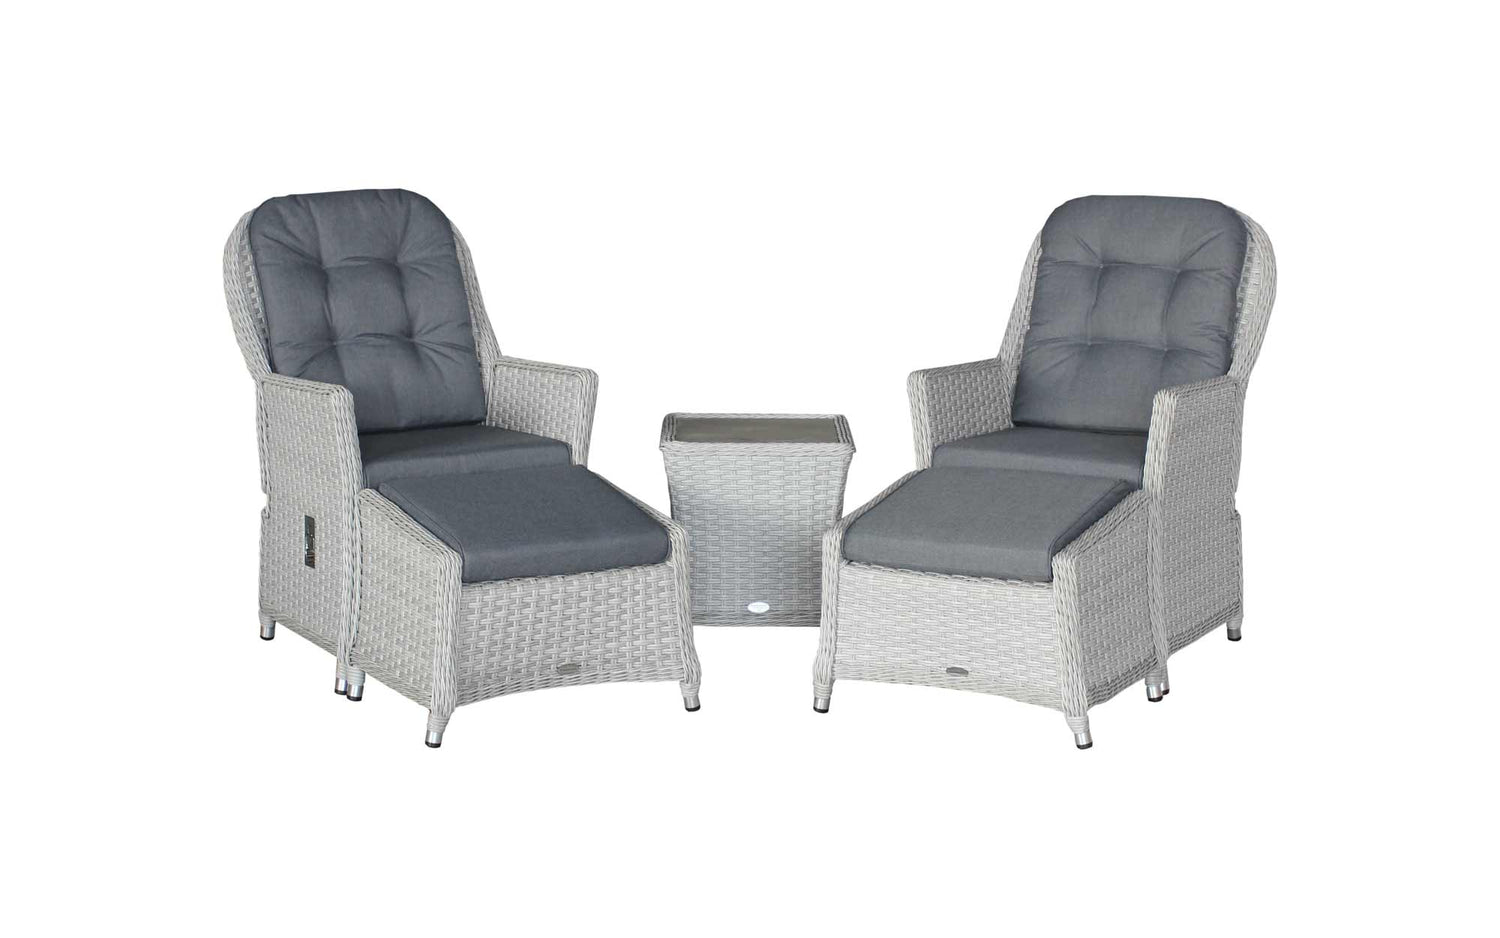 X24WWTCC2-Wentworth-Recliner-Set-with-2-Footstools-&-Side-Table-recliner-set.jpg